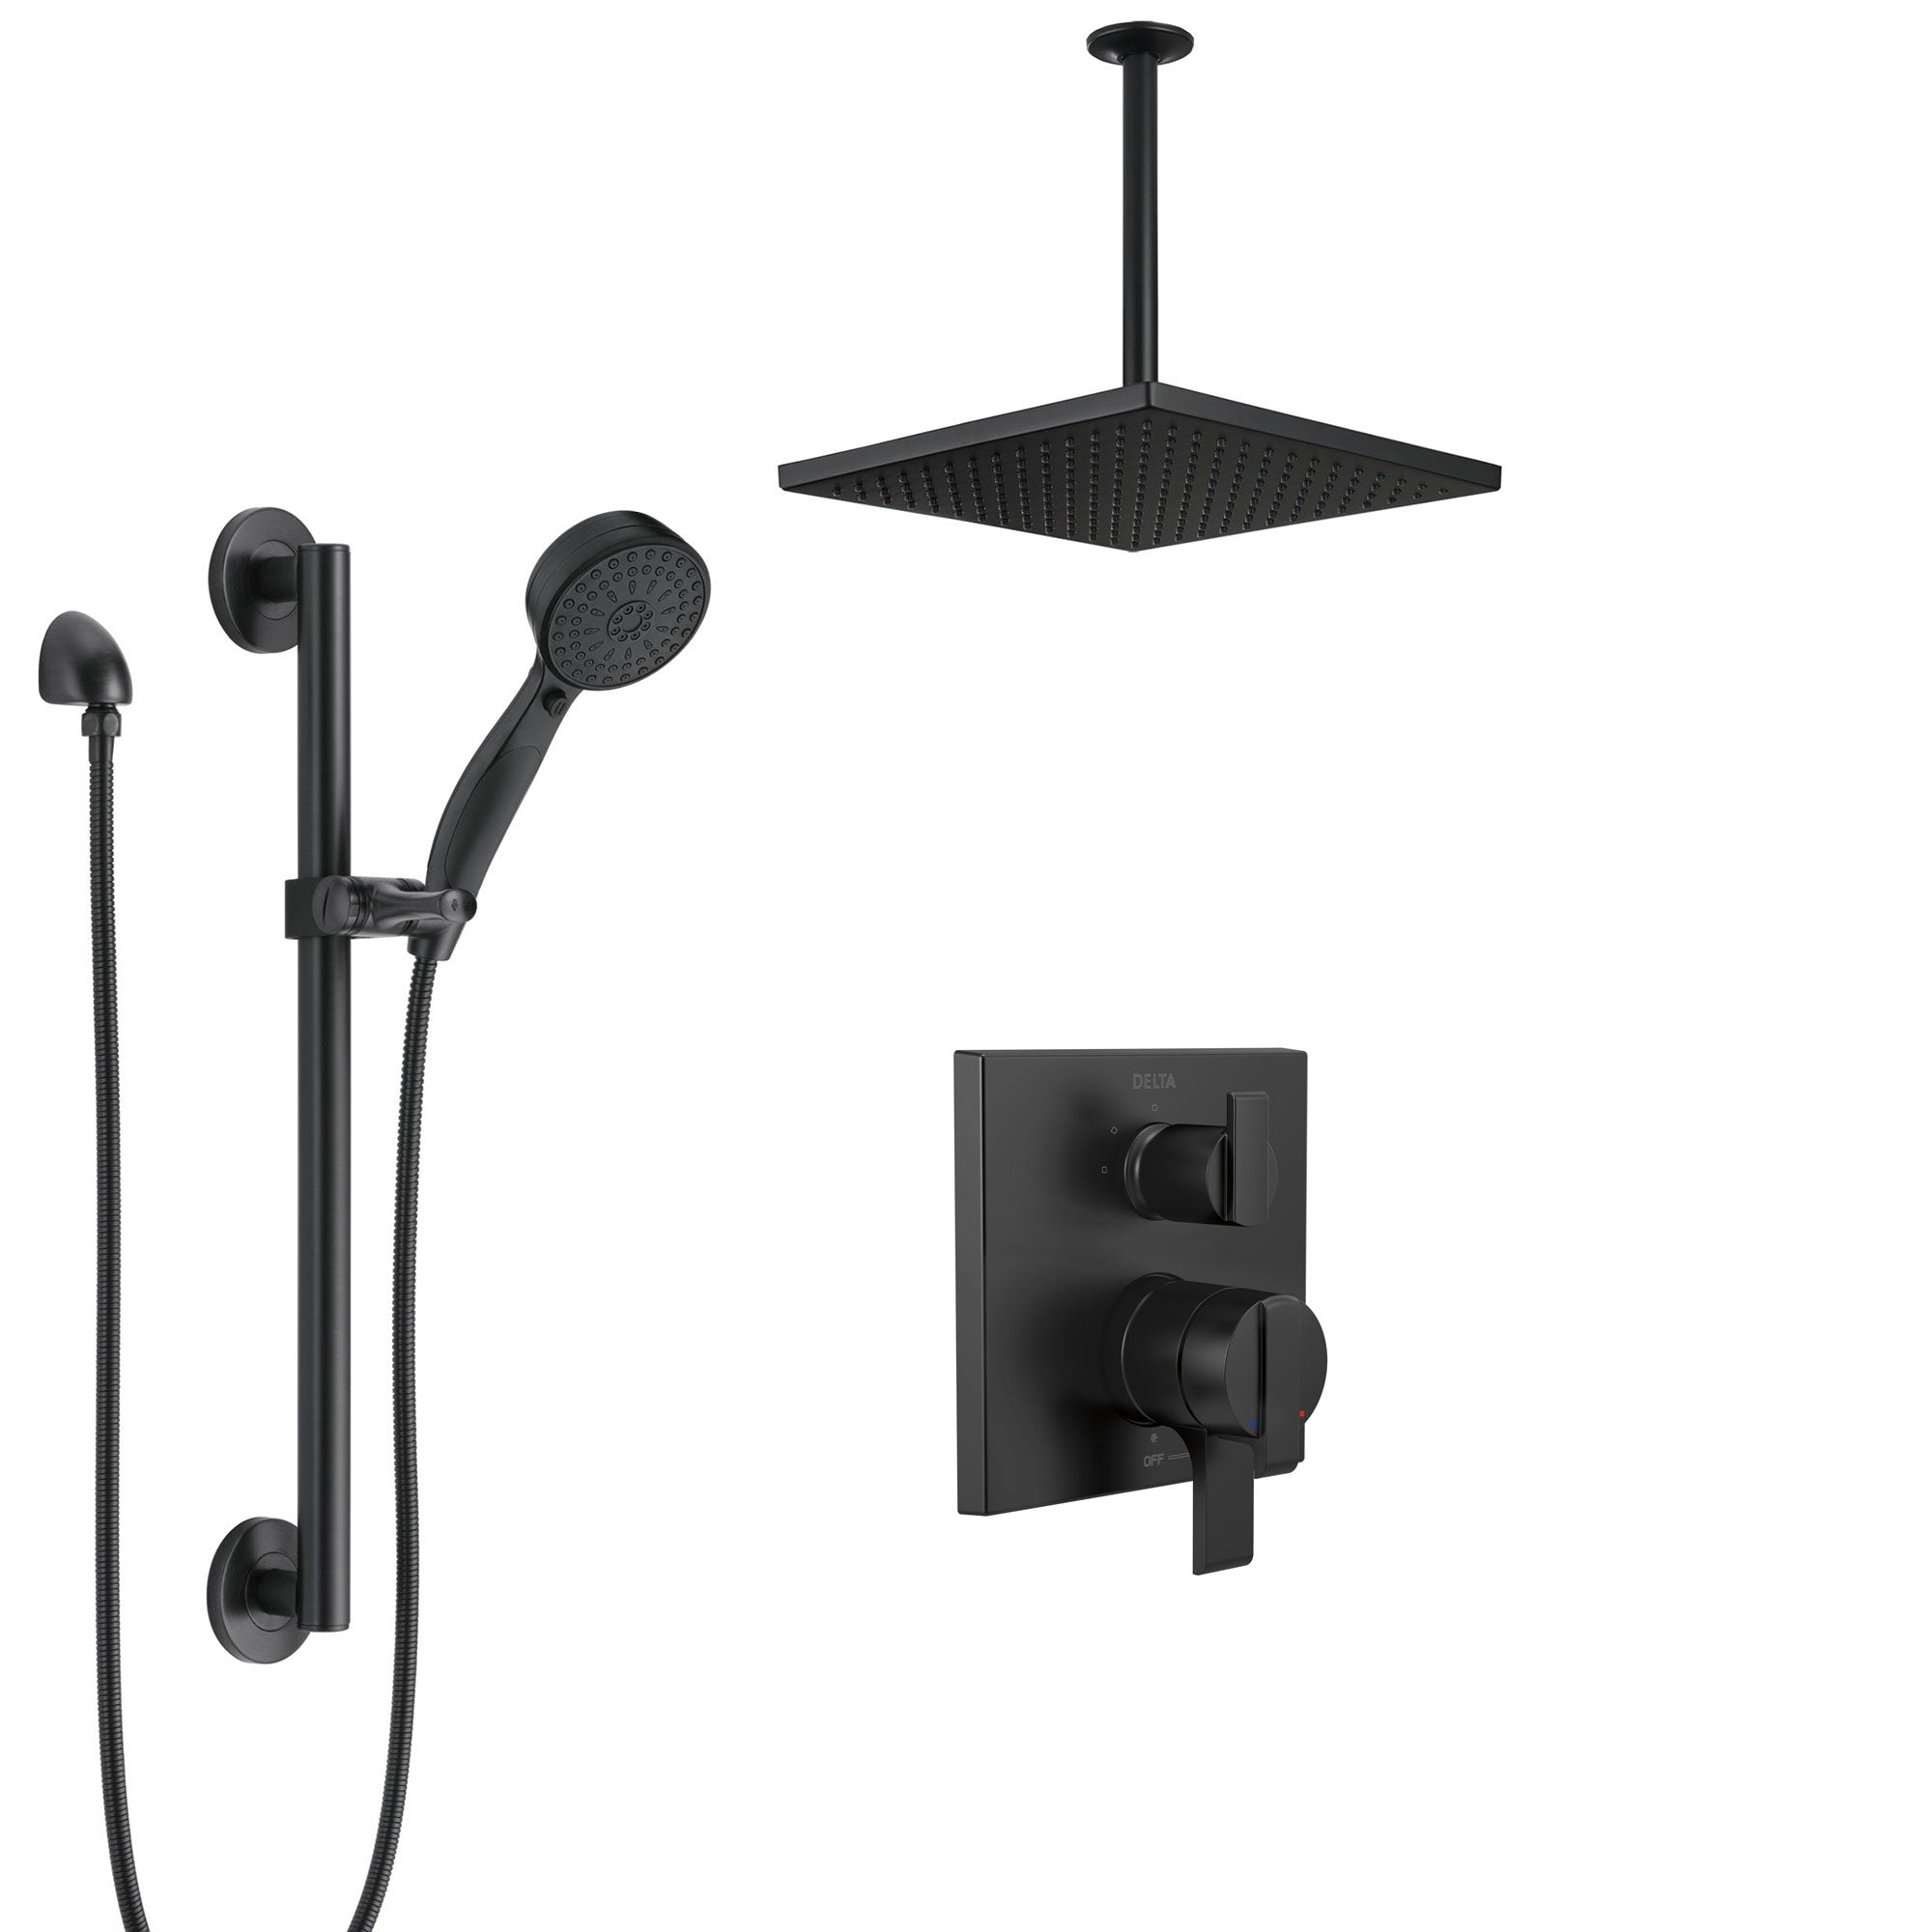 Delta Ara Matte Black Finish Shower System with Integrated Diverter Control, Hand Shower with Grab Bar, and Large Ceiling Mount Showerhead SS27867BL1